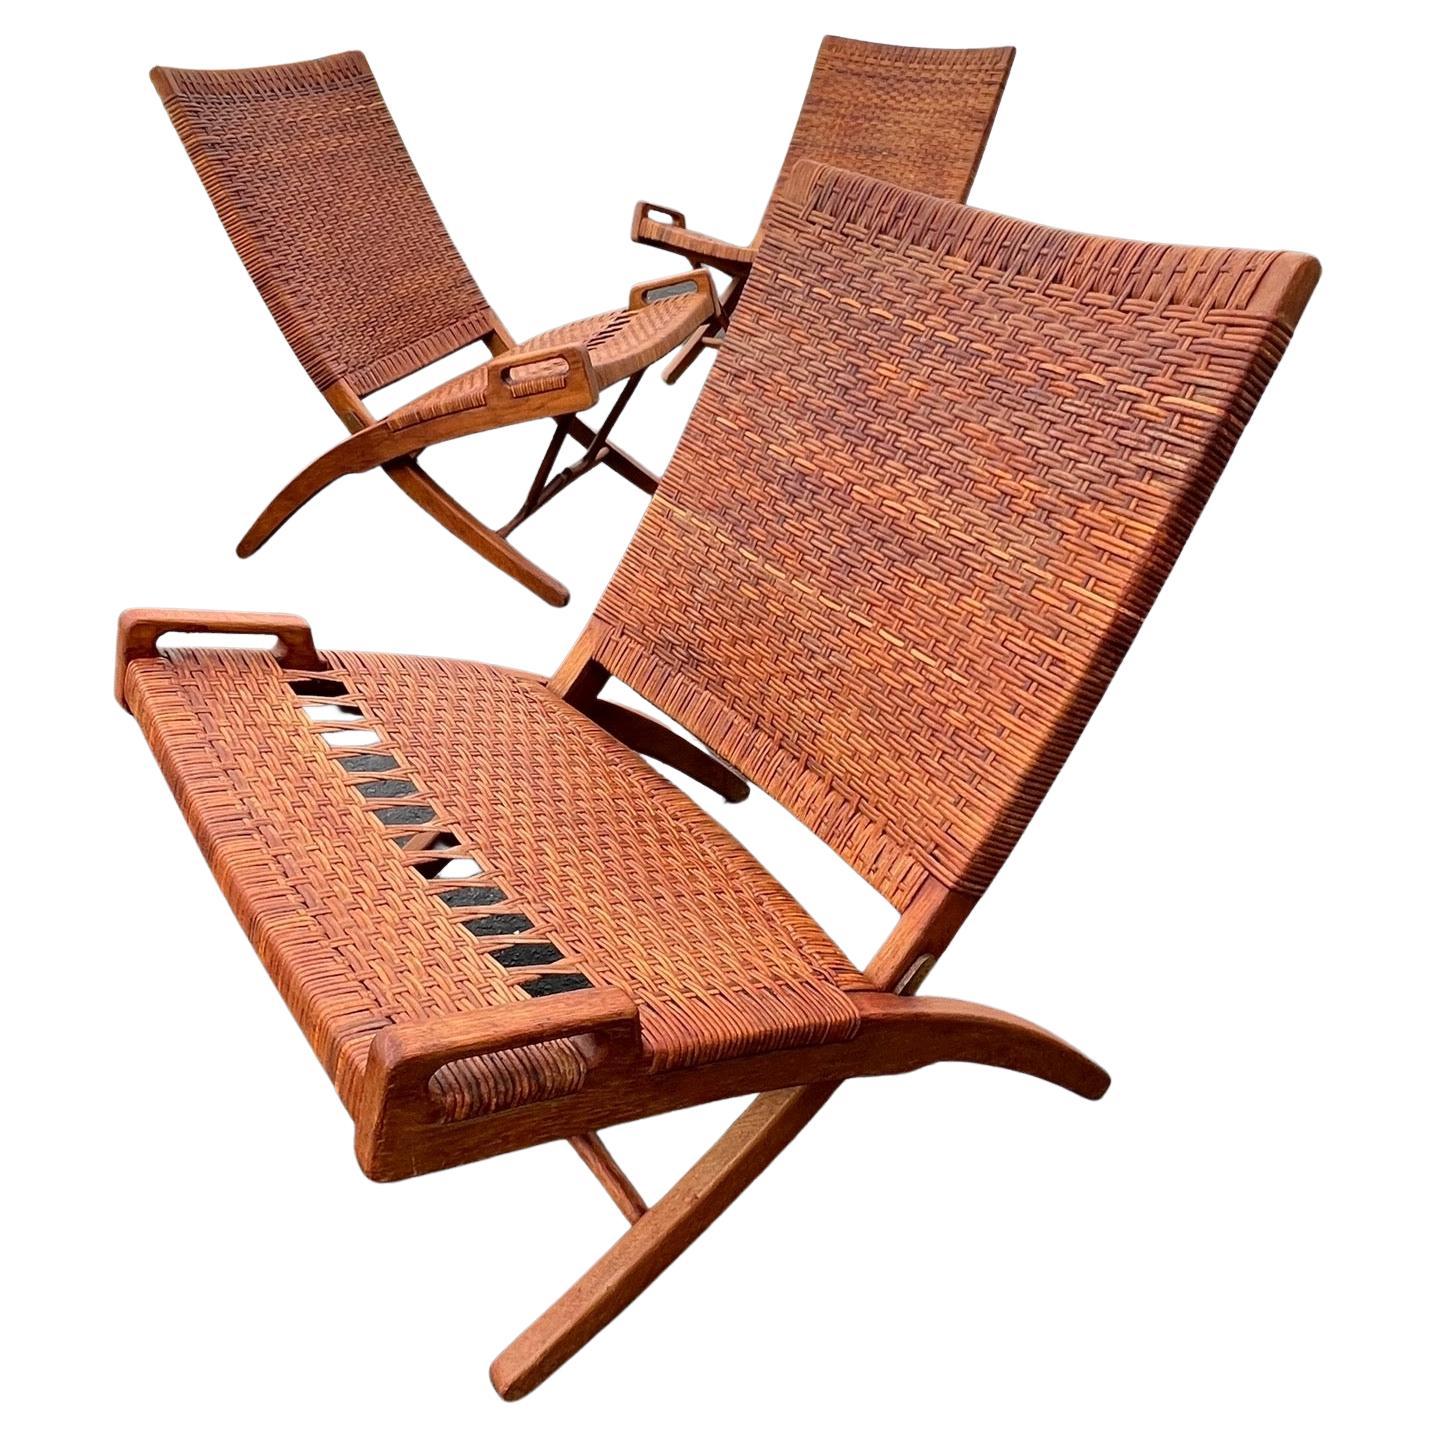 A stunning set of four (4) Hans Wegner folding chairs produced by Johannes Hansen, ca' 1950's. Original caning in very good condition and wonderful patina.